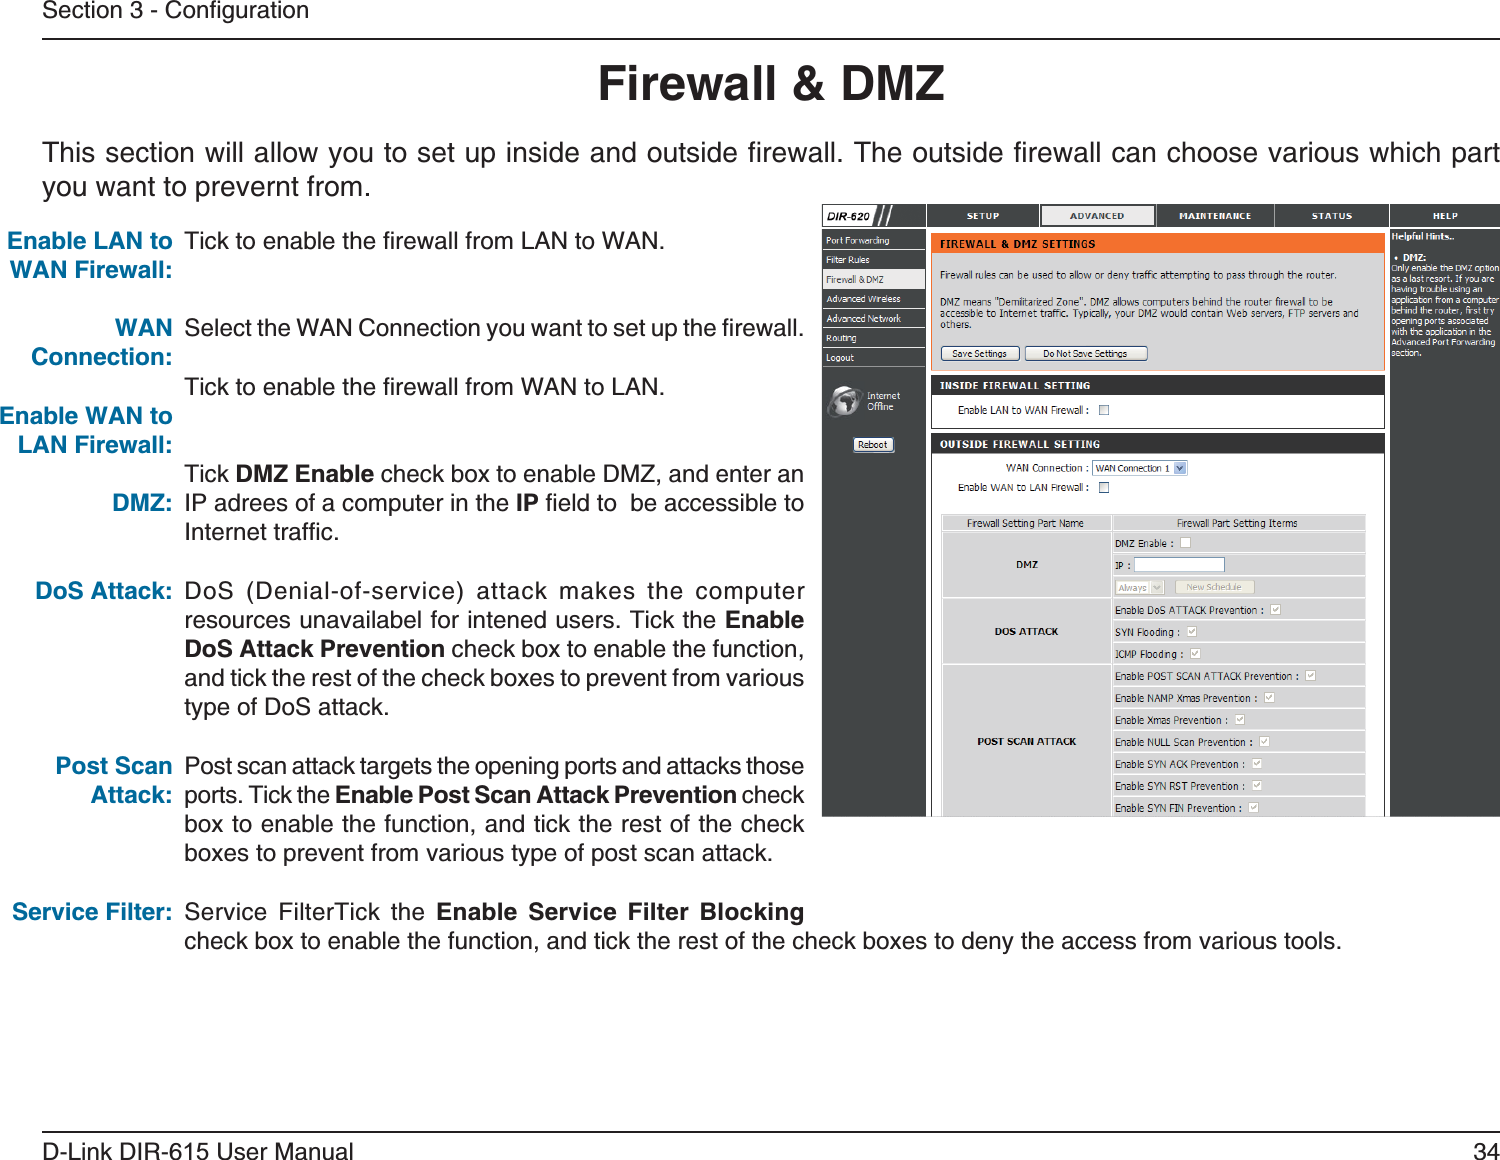 34D-Link DIR-6User ManualSection 3 - ConfigurationThis section will allow you to set up inside and outside firewall. The outside firewall can choose various which part you want to prevernt from.Tick to enable the firewall from LAN to WAN.Select the WAN Connection you want to set up the firewall.Tick to enable the firewall from WAN to LAN.Tick  check box to enable DMZ, and enter an IP adrees of a computer in the IP field to  be accessible to Internet traffic.DoS (Denial-of-service) attack makes the computer resources unavailabel for intened users. Tick the  check box to enable the function, and tick the rest of the check boxes to prevent from various type of DoS attack.Post scan attack targets the opening ports and attacks those ports. Tick the  check box to enable the function, and tick the rest of the check boxes to prevent from various type of post scan attack.Service FilterTick the     check box to enable the function, and tick the rest of the check boxes to deny the access from various tools.